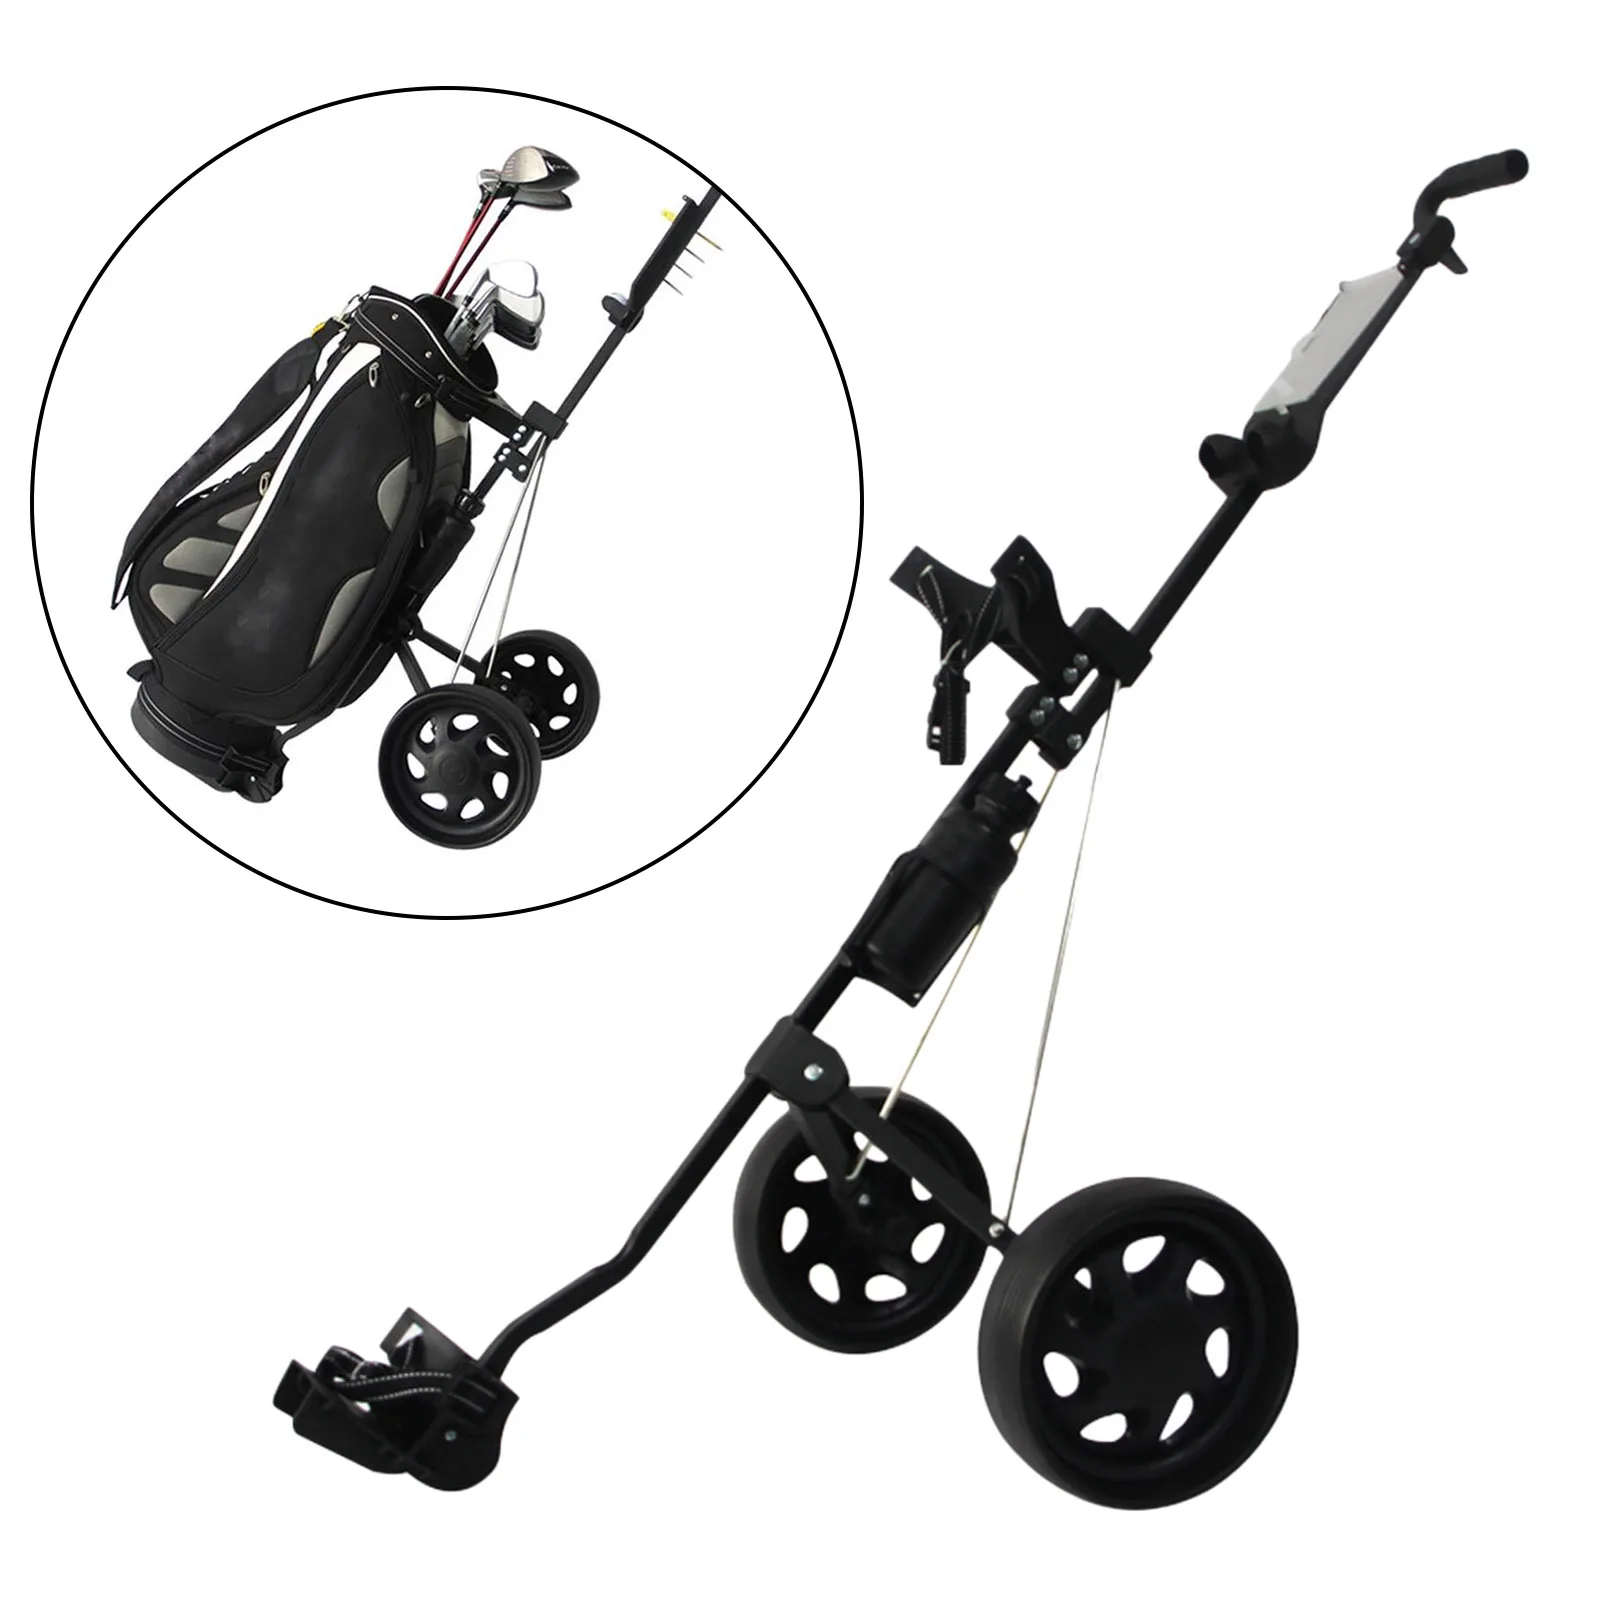 Wheel Golf Push Pull Cart Folding Trolley Carry Golf Pack Holder Accessories